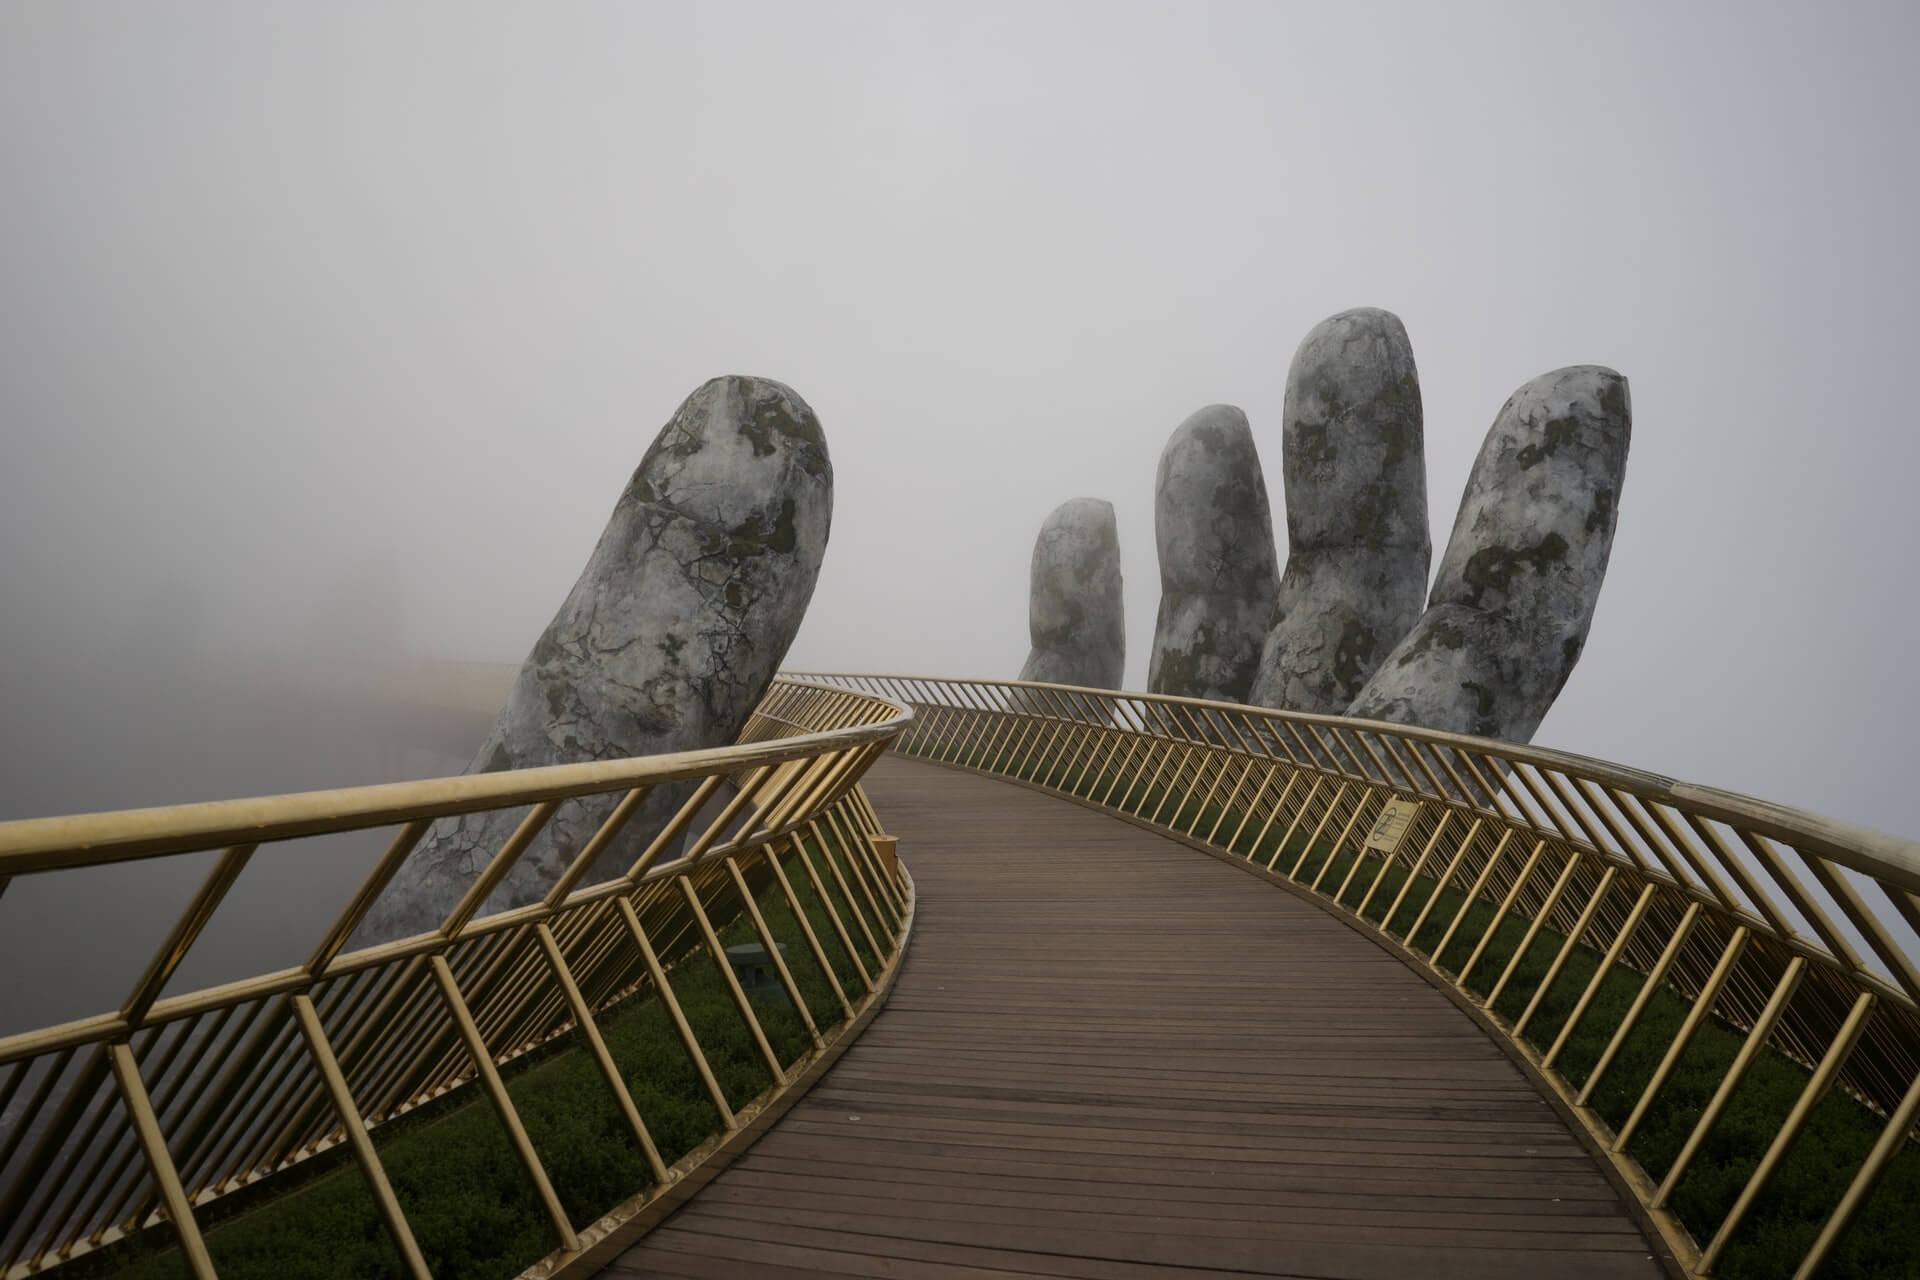 Image of a stone reaching up from the fog to grasp a bridge